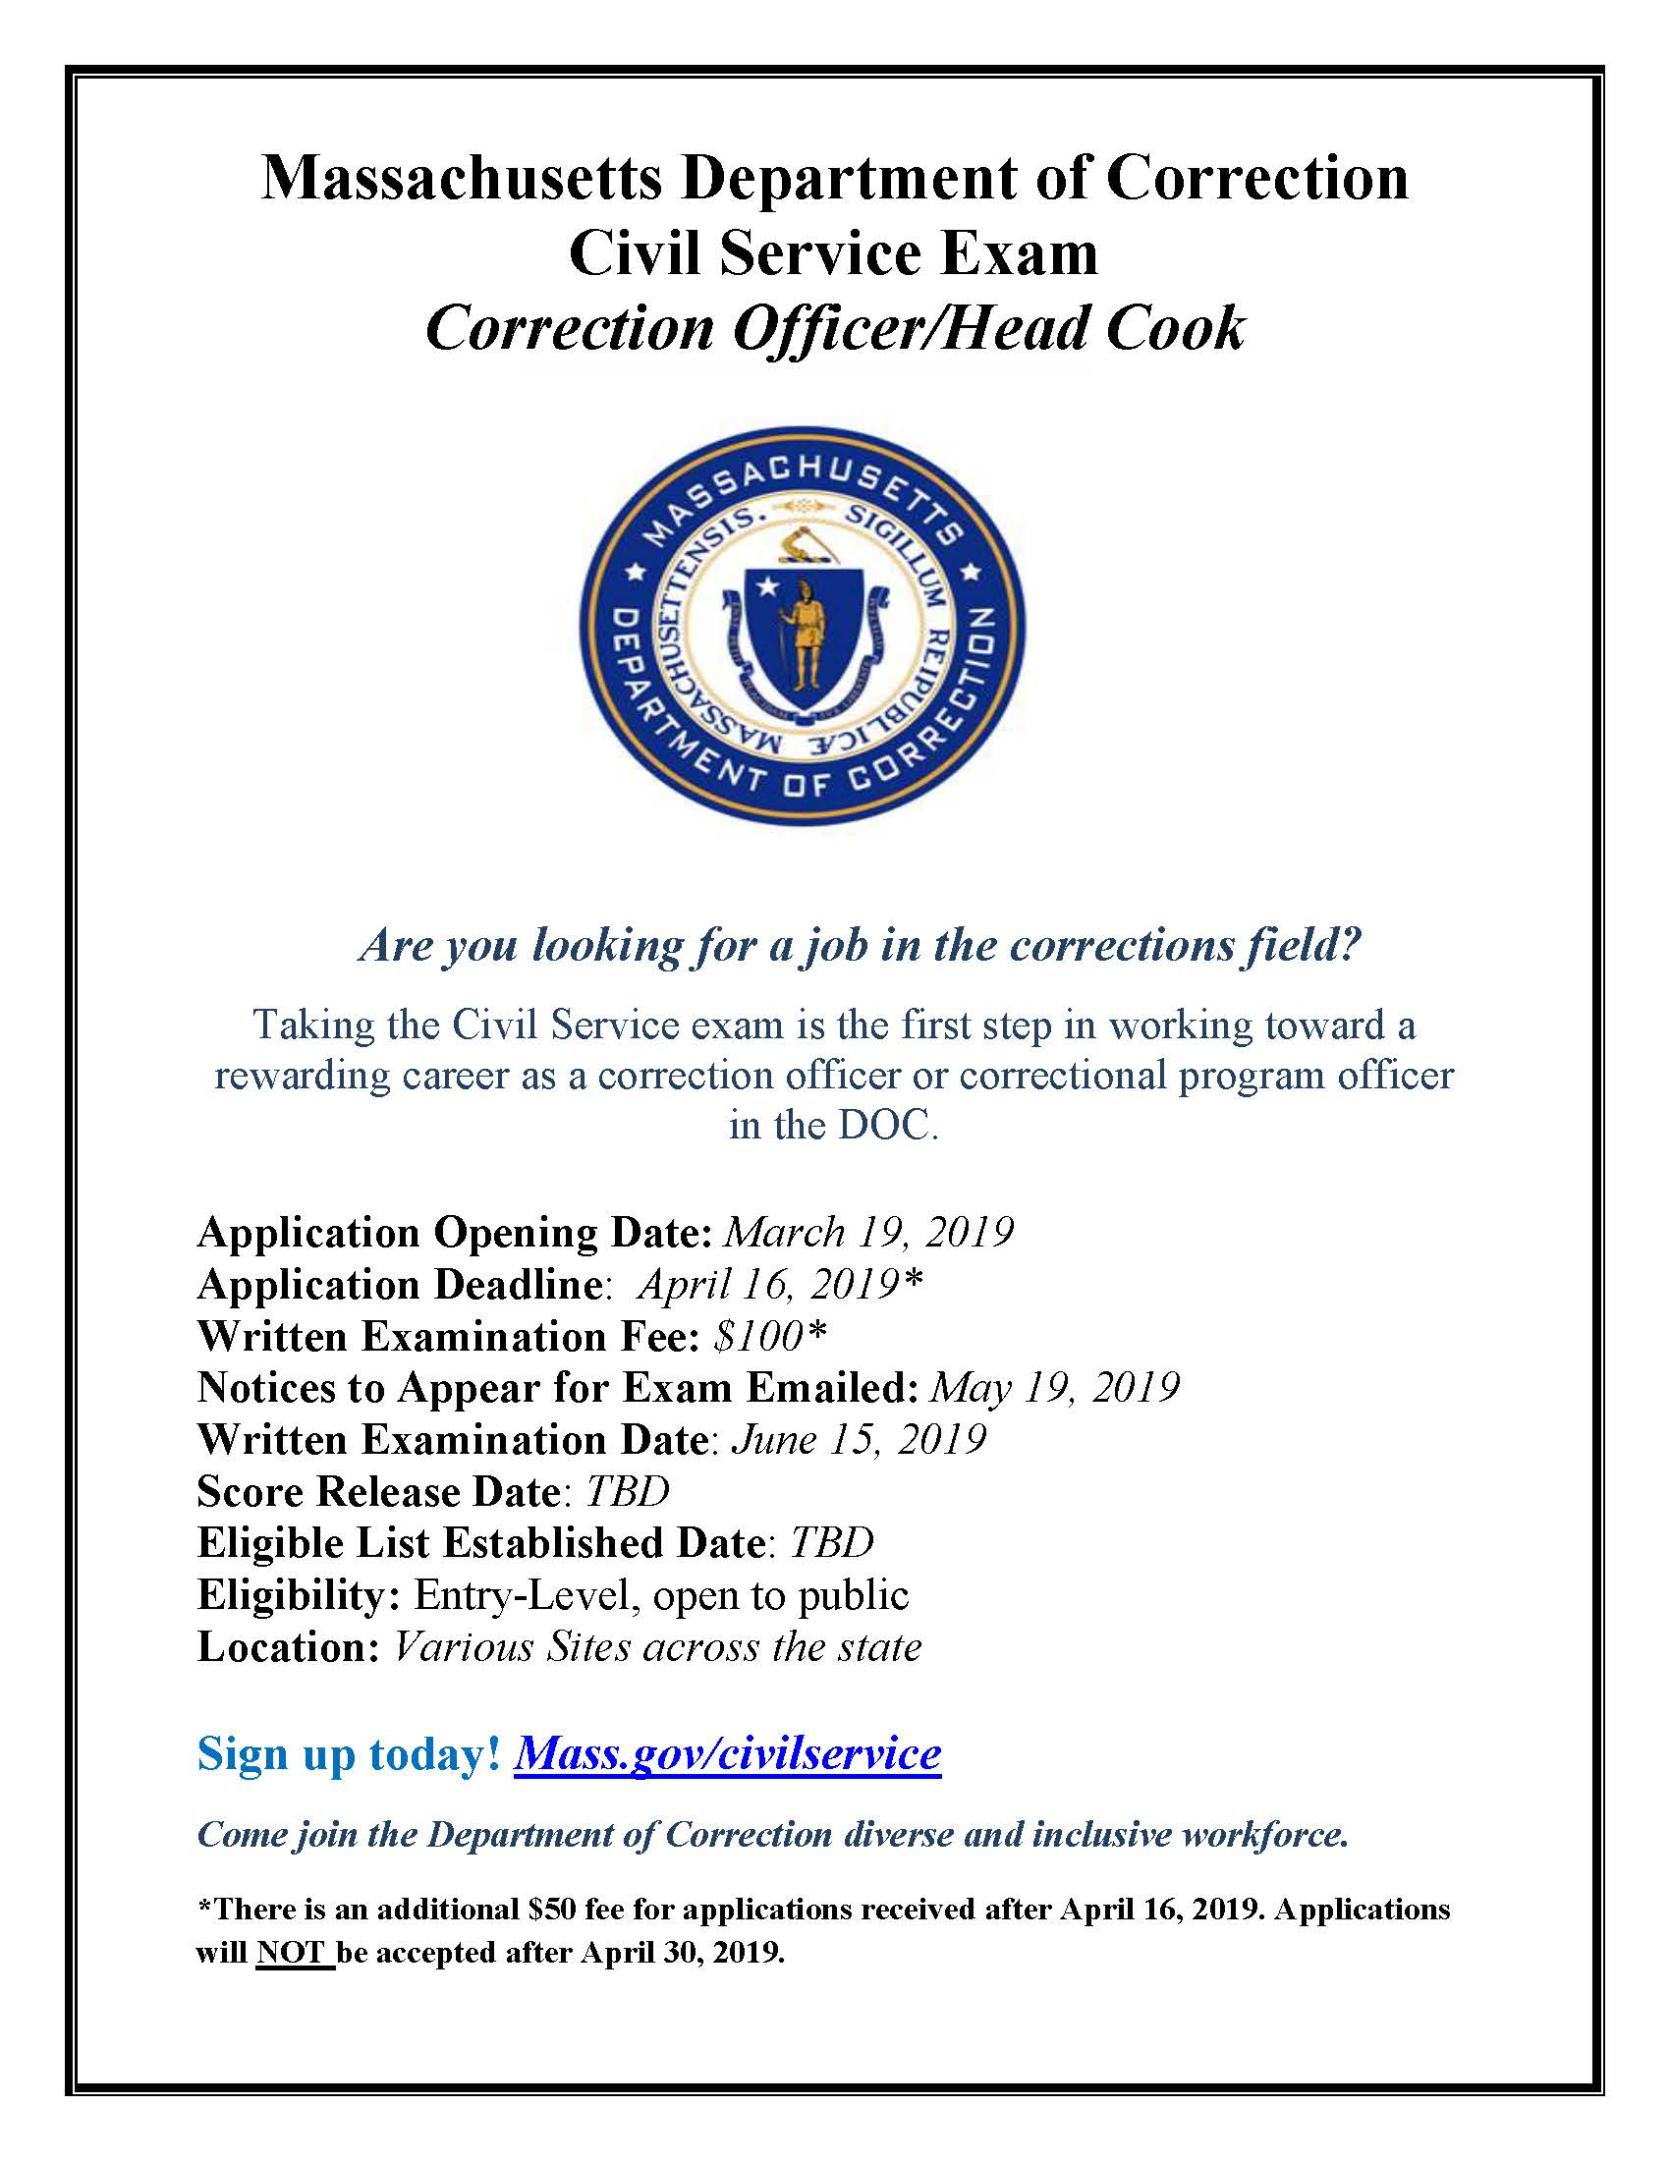 April 2019 Correction Officer/Head Cook Exam Posting